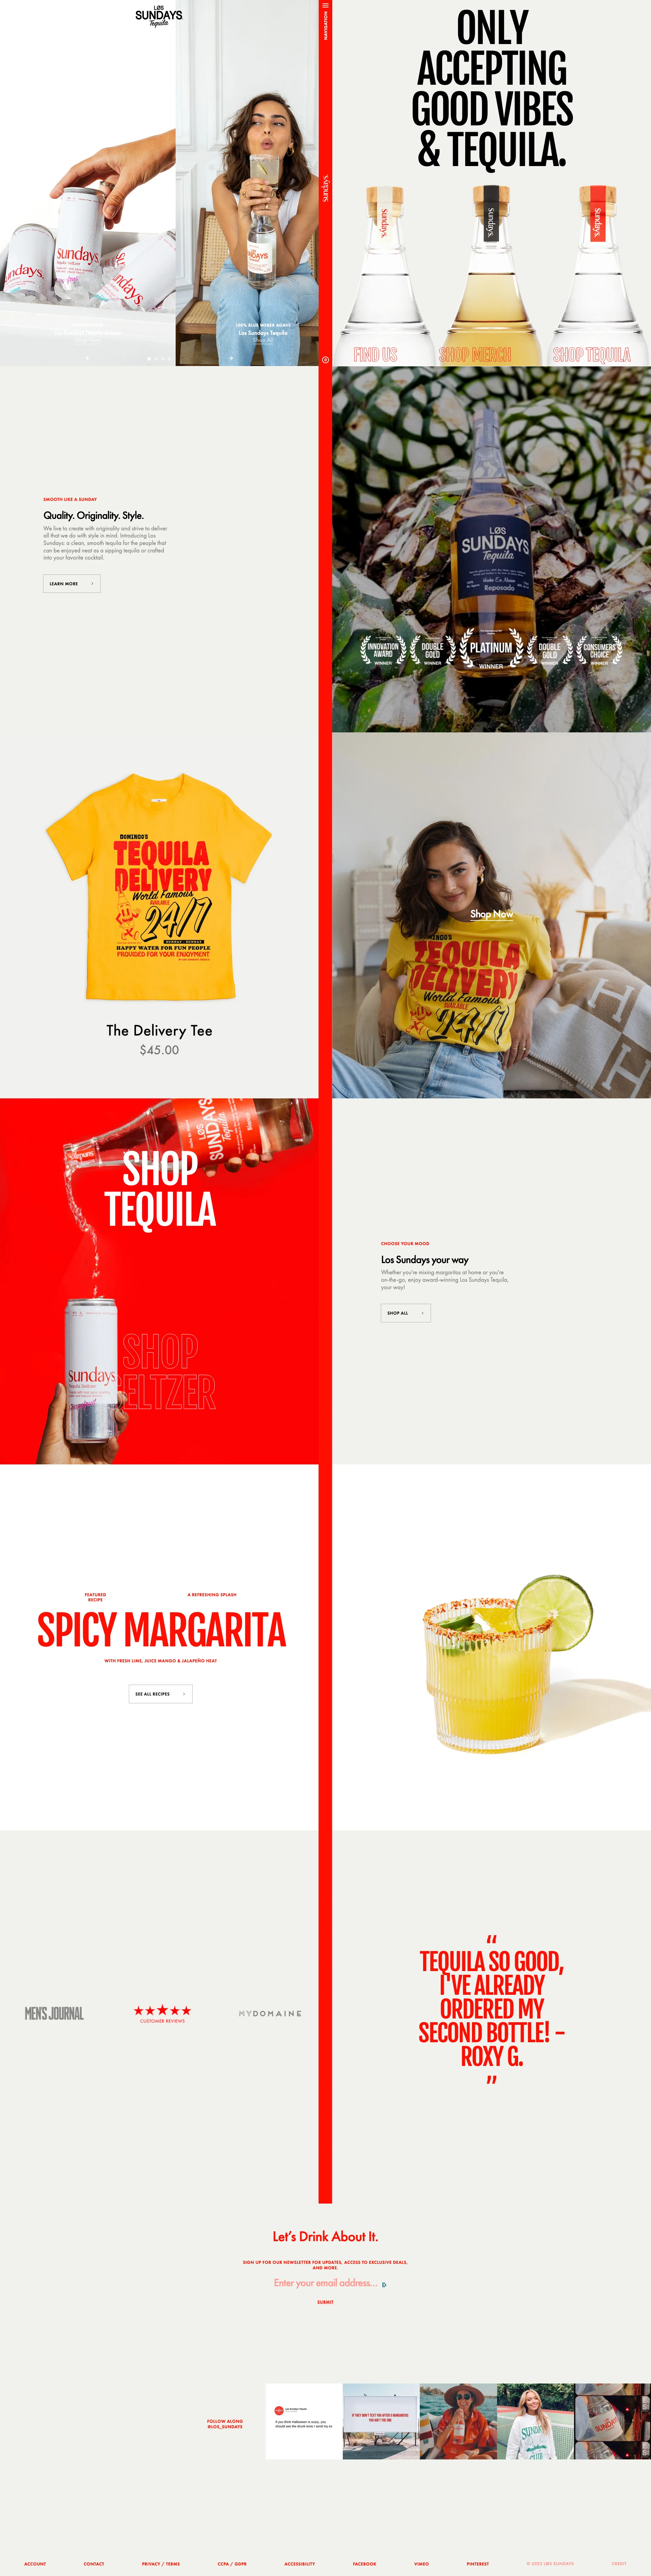 Løs Sundays Tequila Landing Page Example: We absolutely love tequila, so we demand quality. We live to create with originality and we deliver it all with style in mind. Thus, born from our favorite day of the week, we present Løs Sundays Tequila for your enjoyment.